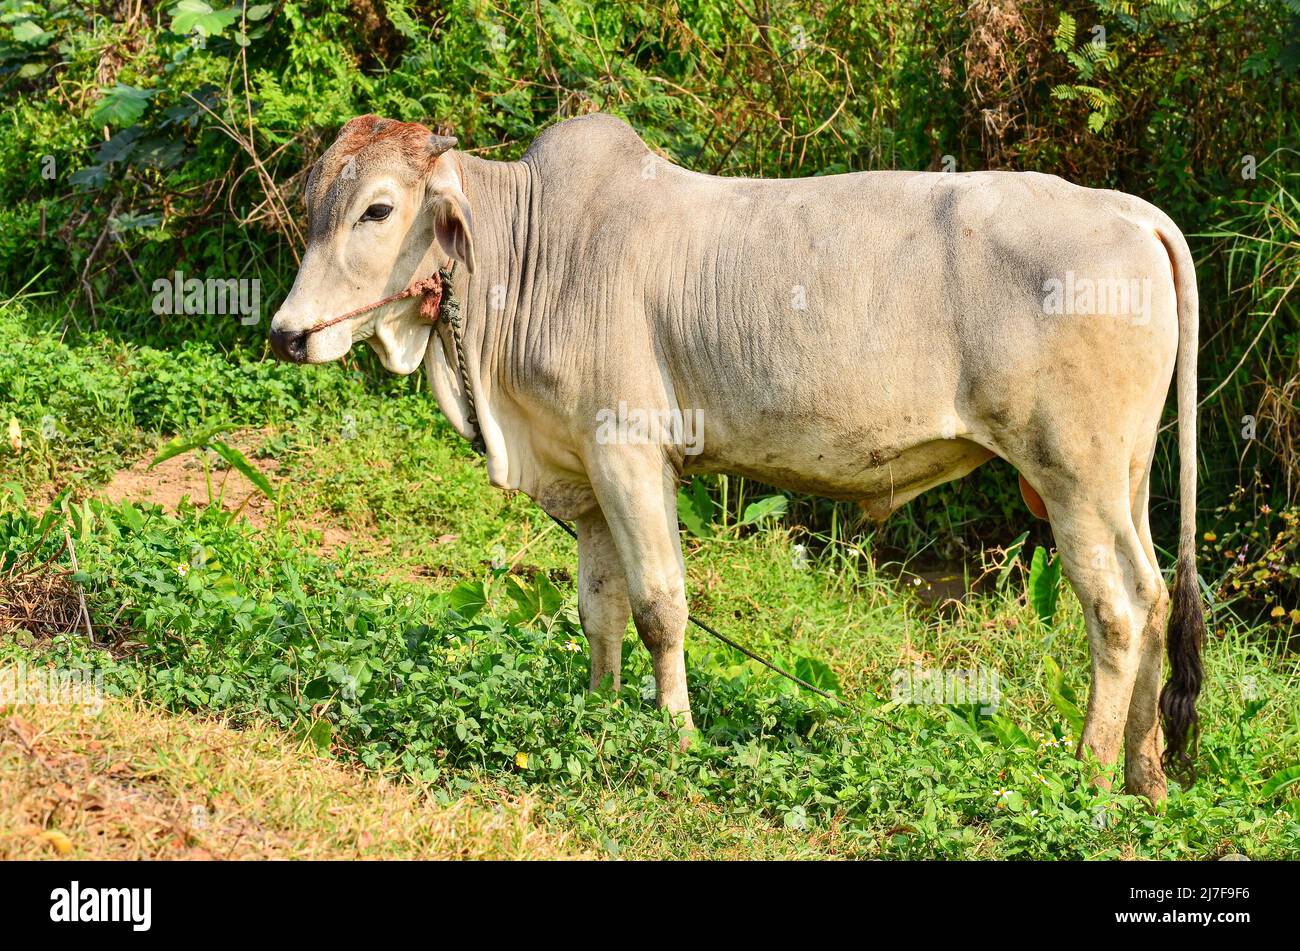 Native breeds of cows live in the fields Stock Photo